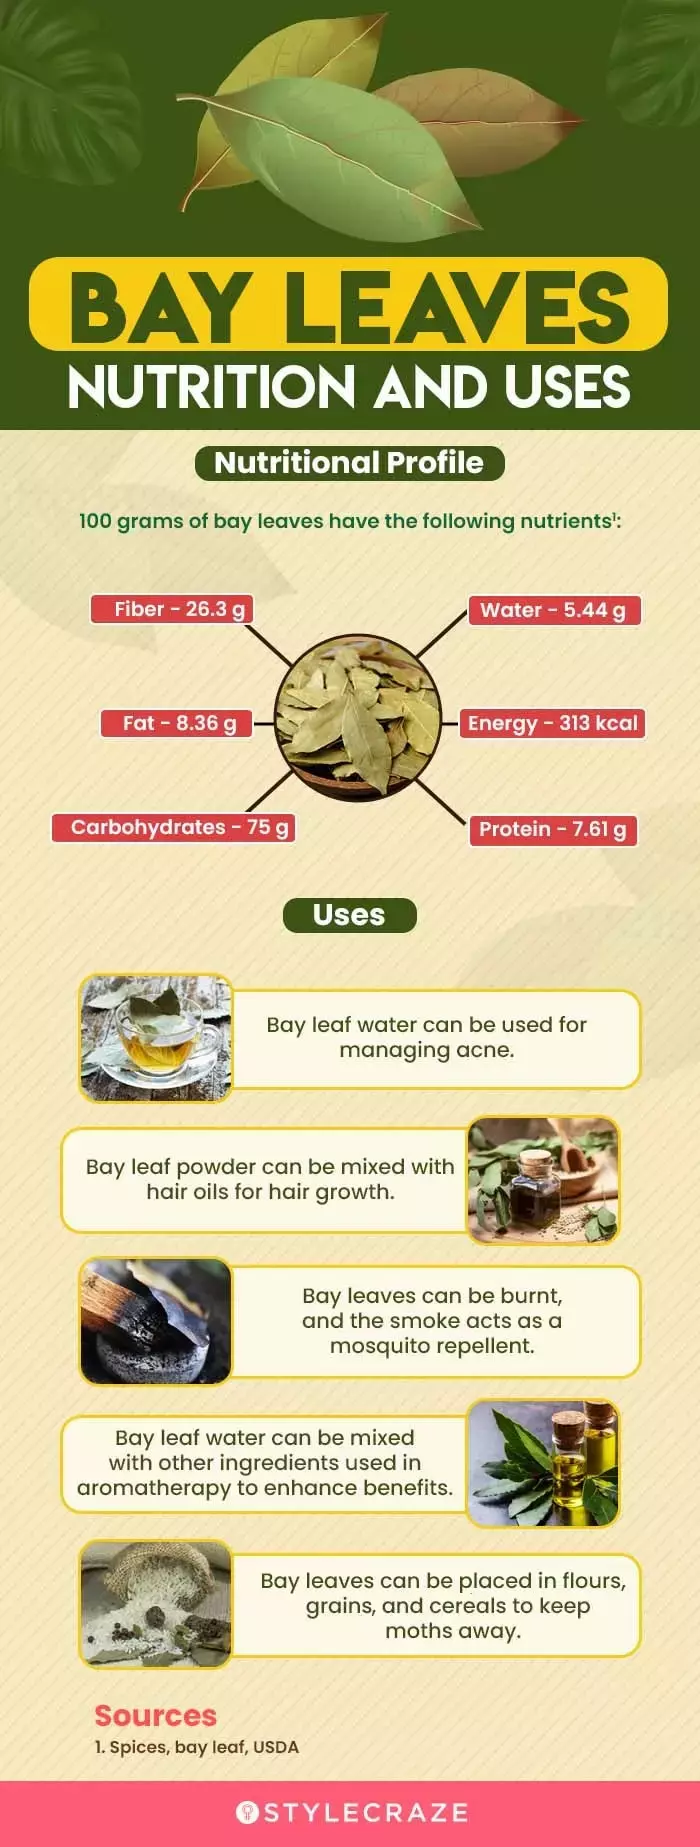 bay leaves nutrition and uses (infographic)